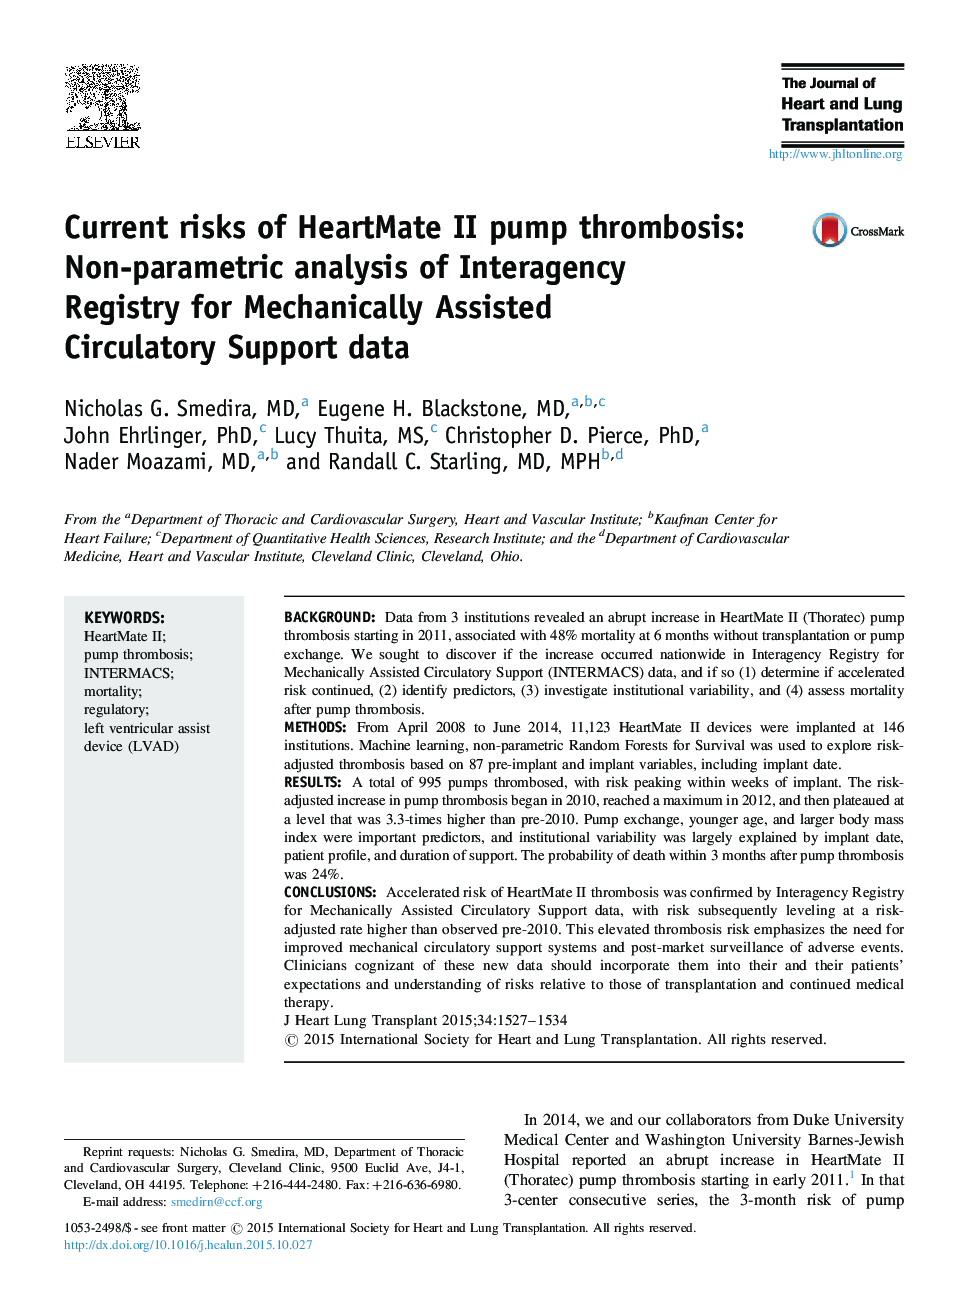 Current risks of HeartMate II pump thrombosis: Non-parametric analysis of Interagency Registry for Mechanically Assisted Circulatory Support data